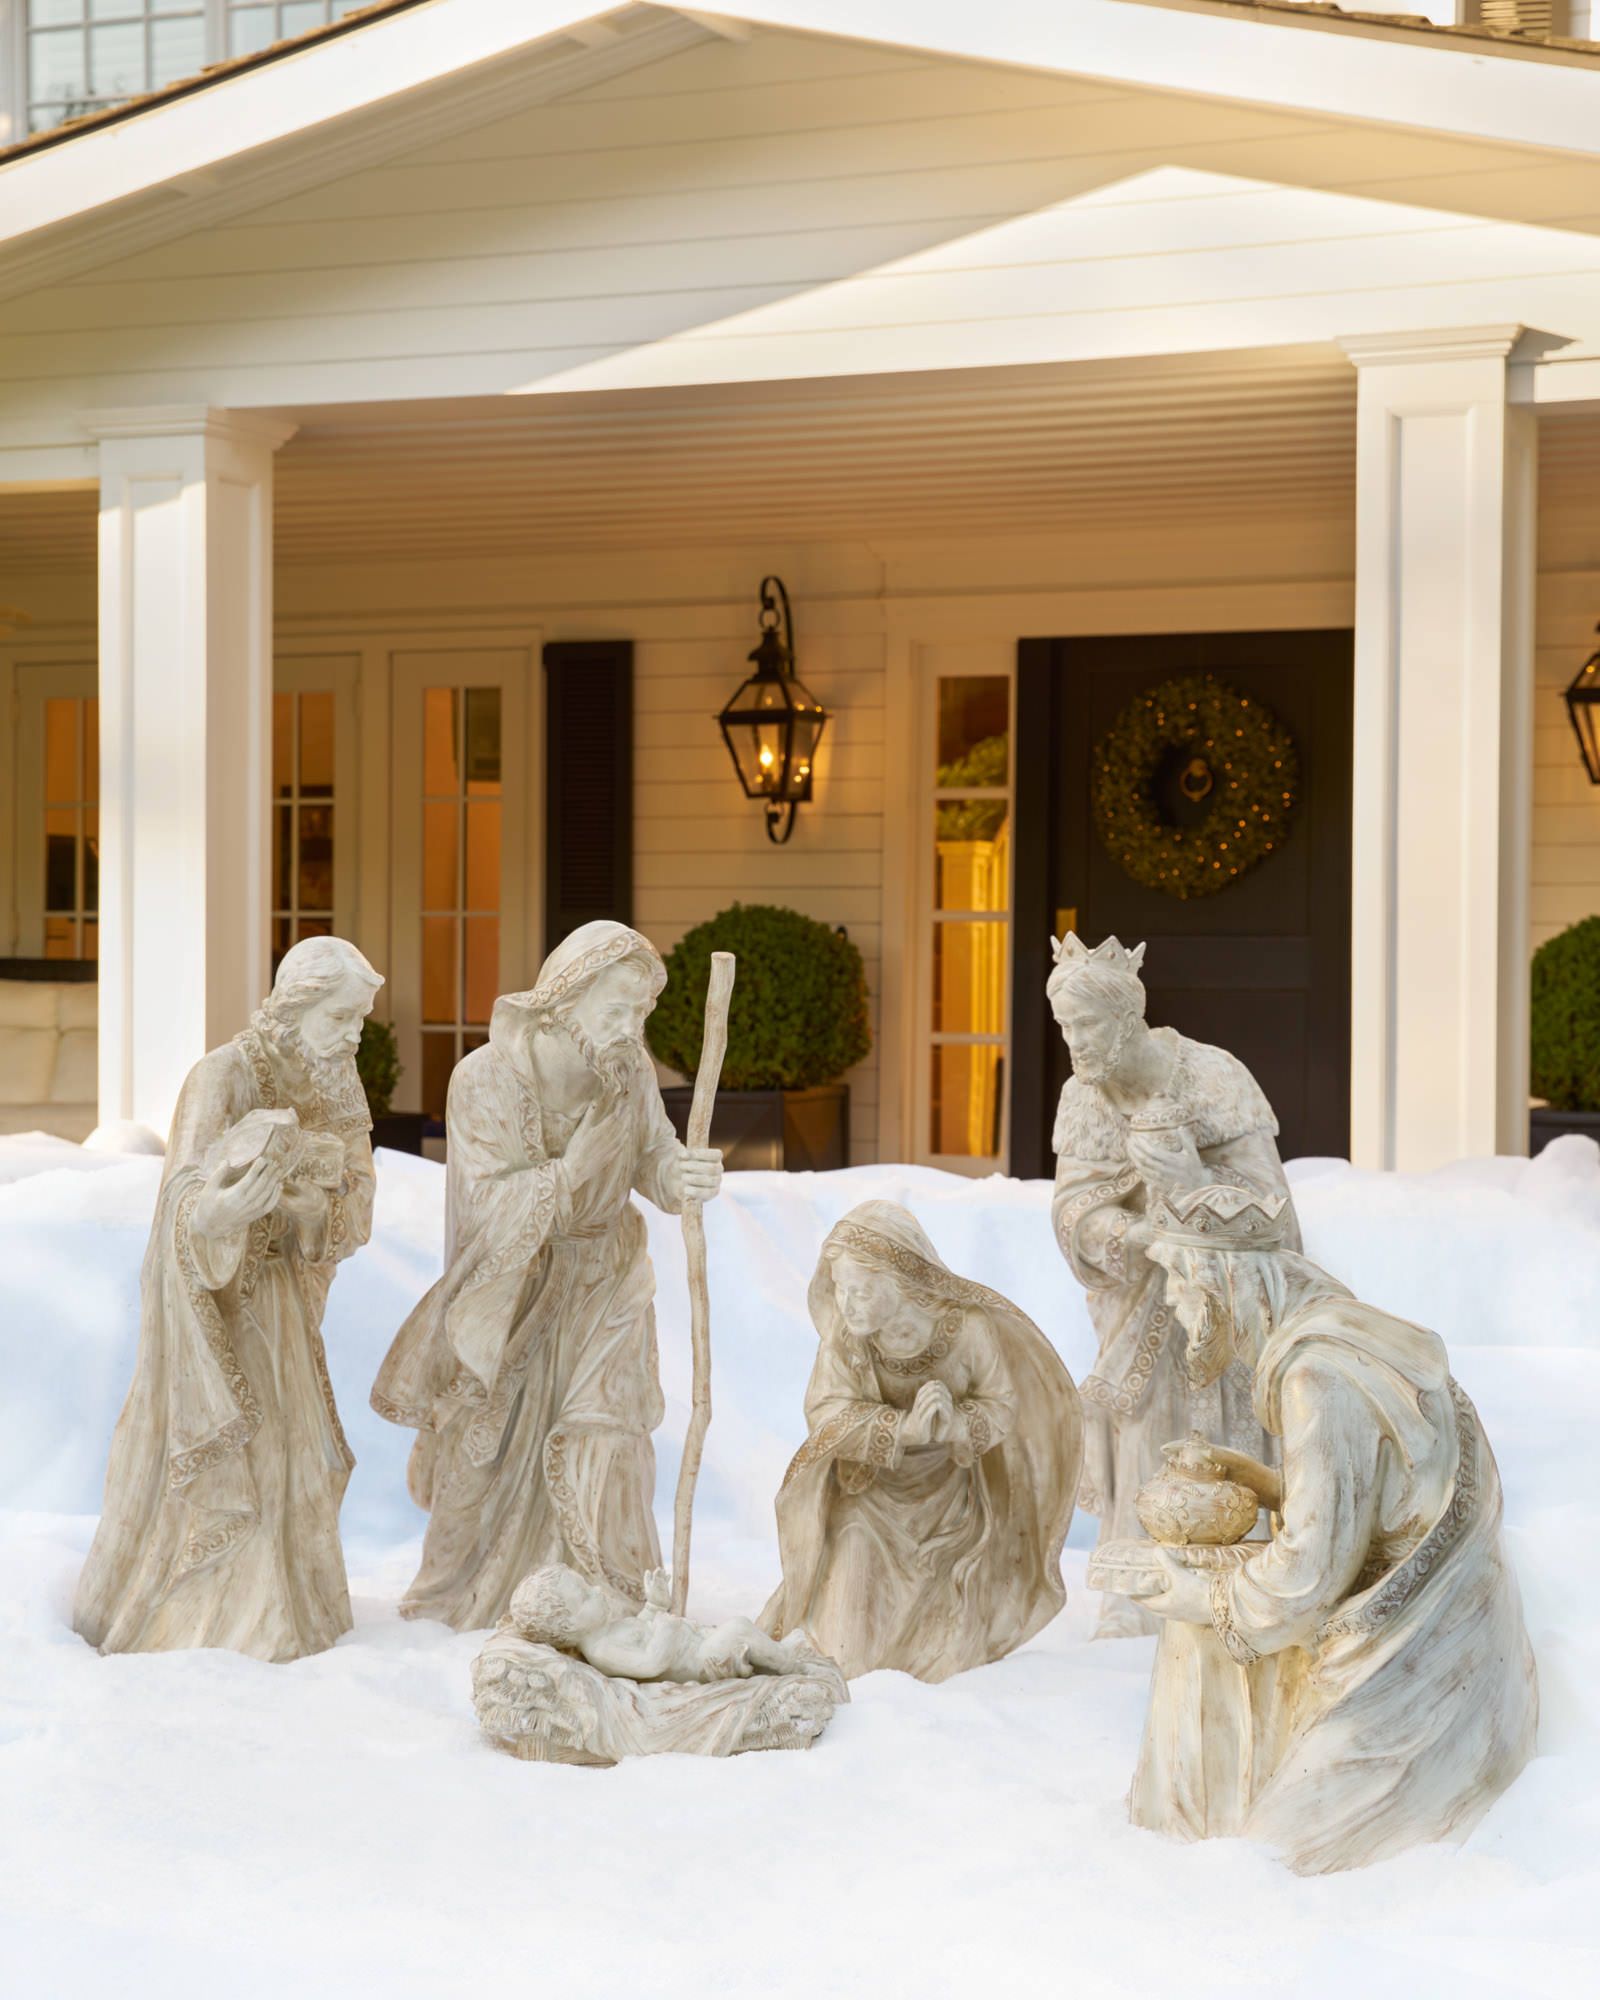 Photo from a Nativity scene in front of a house